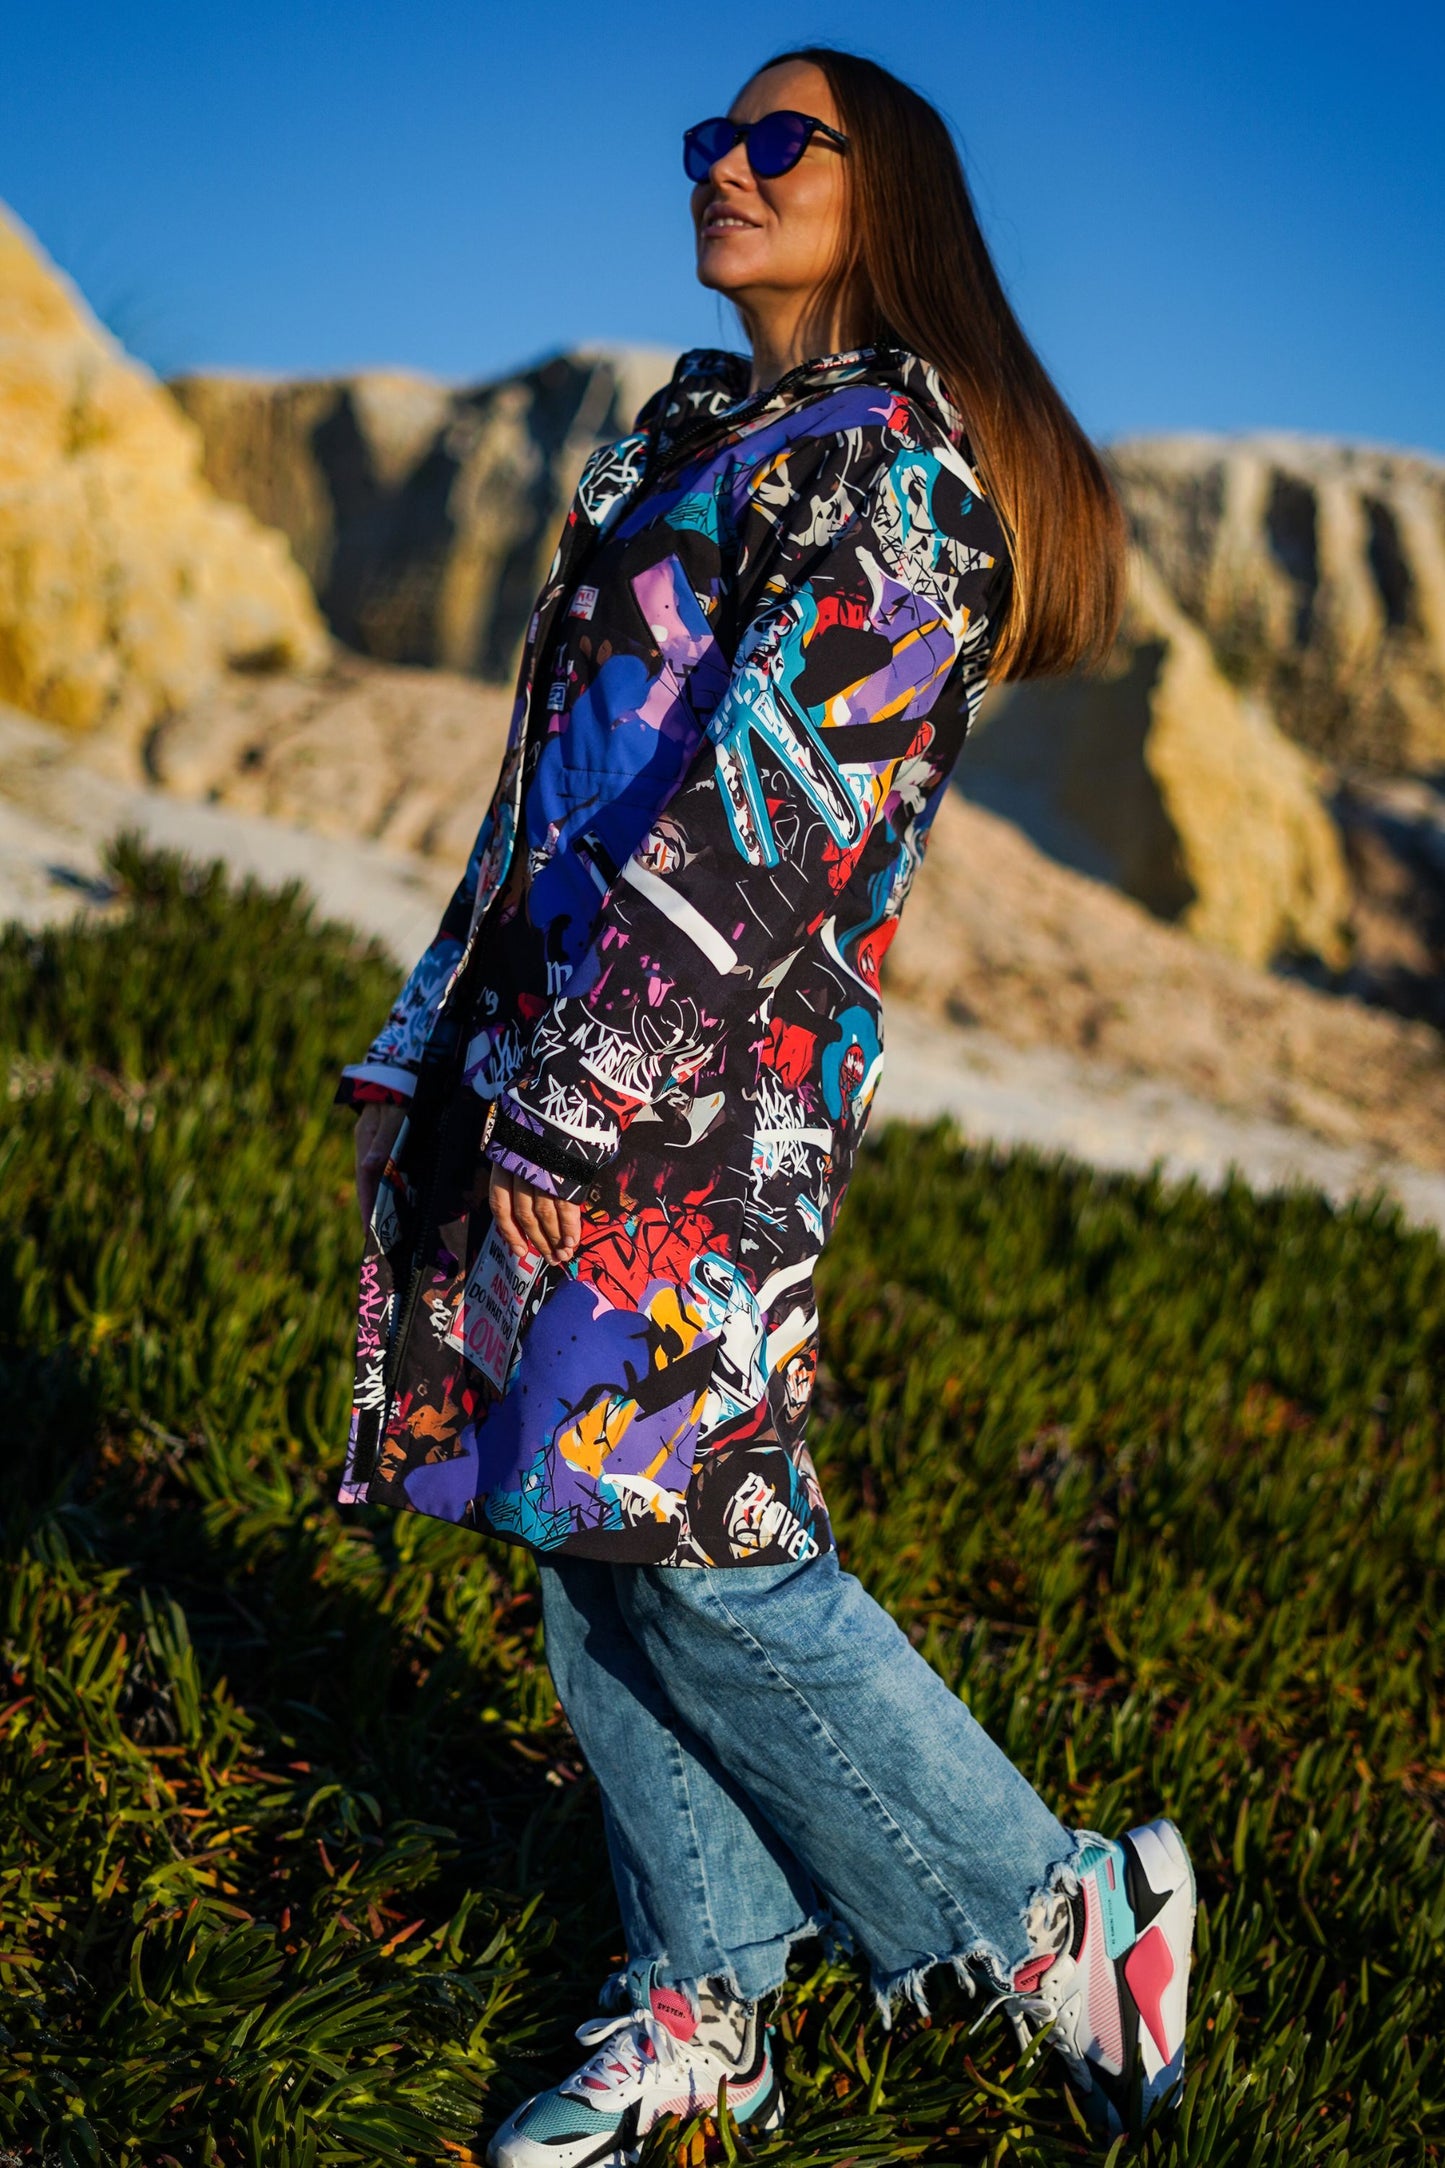 Women's softshell parka / coat with colorful love & peace print